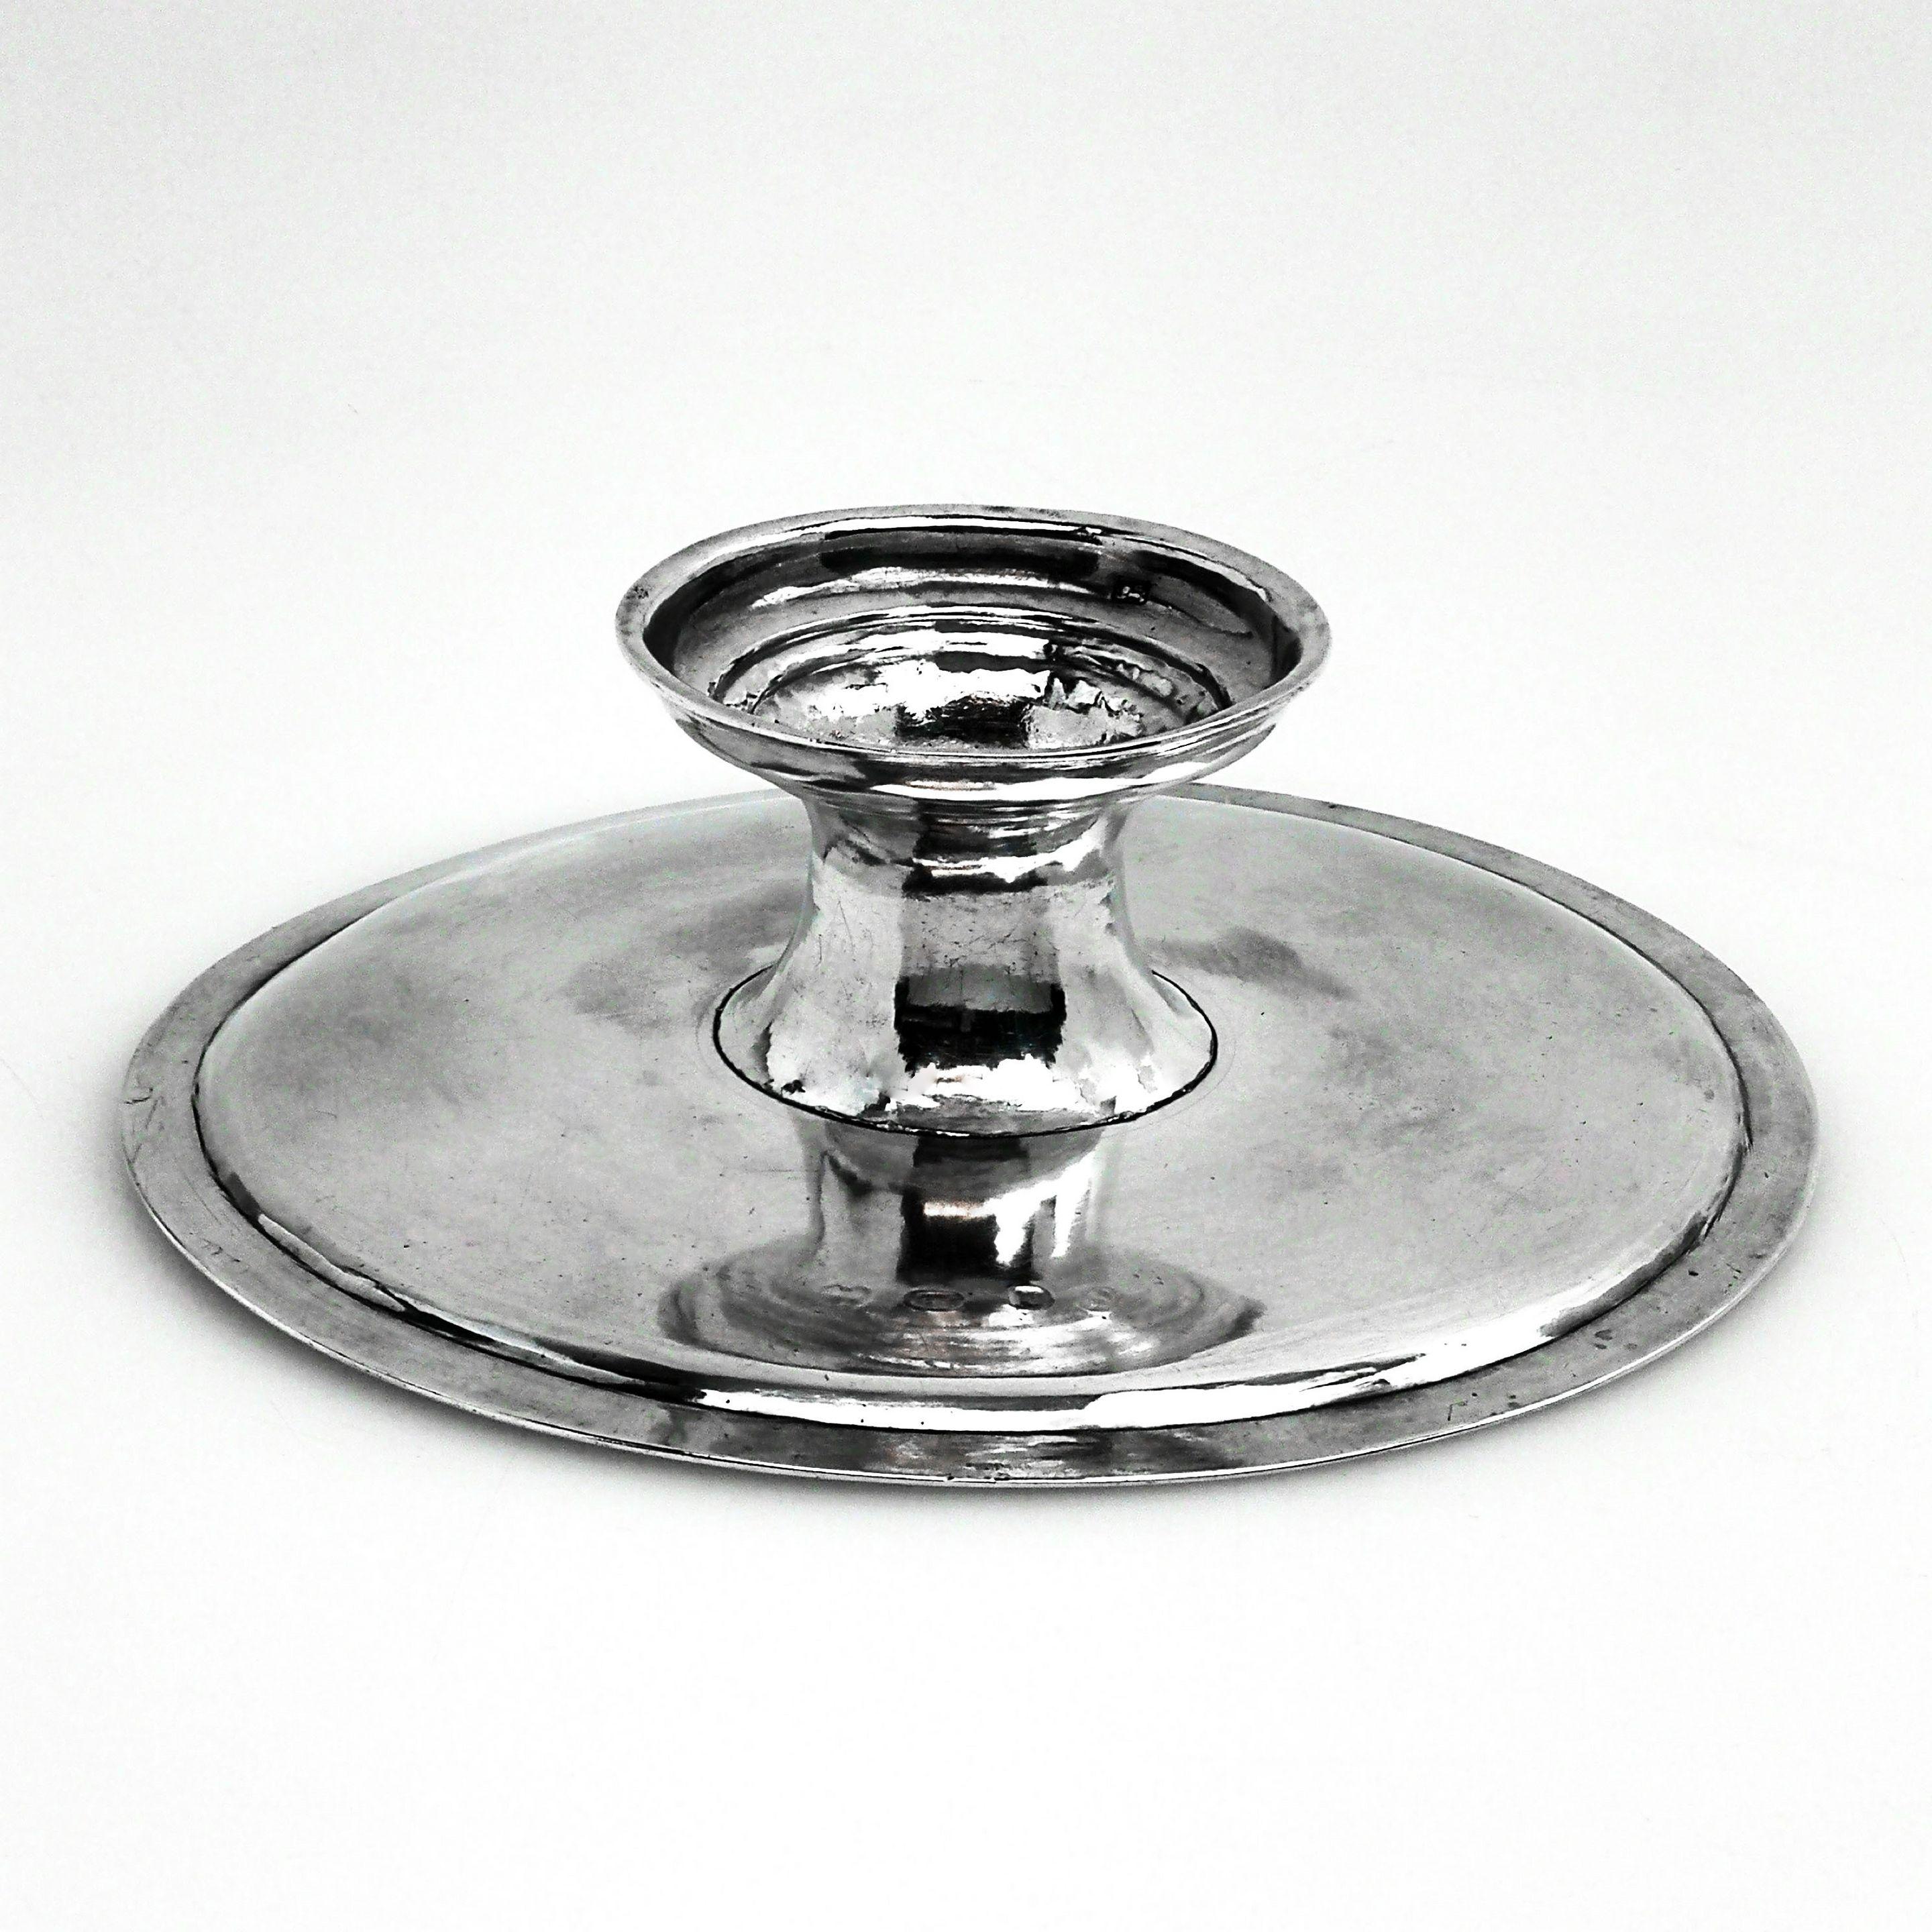 English Antique George I Sterling Silver Tazza / Plate 1721 Early Georgian, 18th Century For Sale